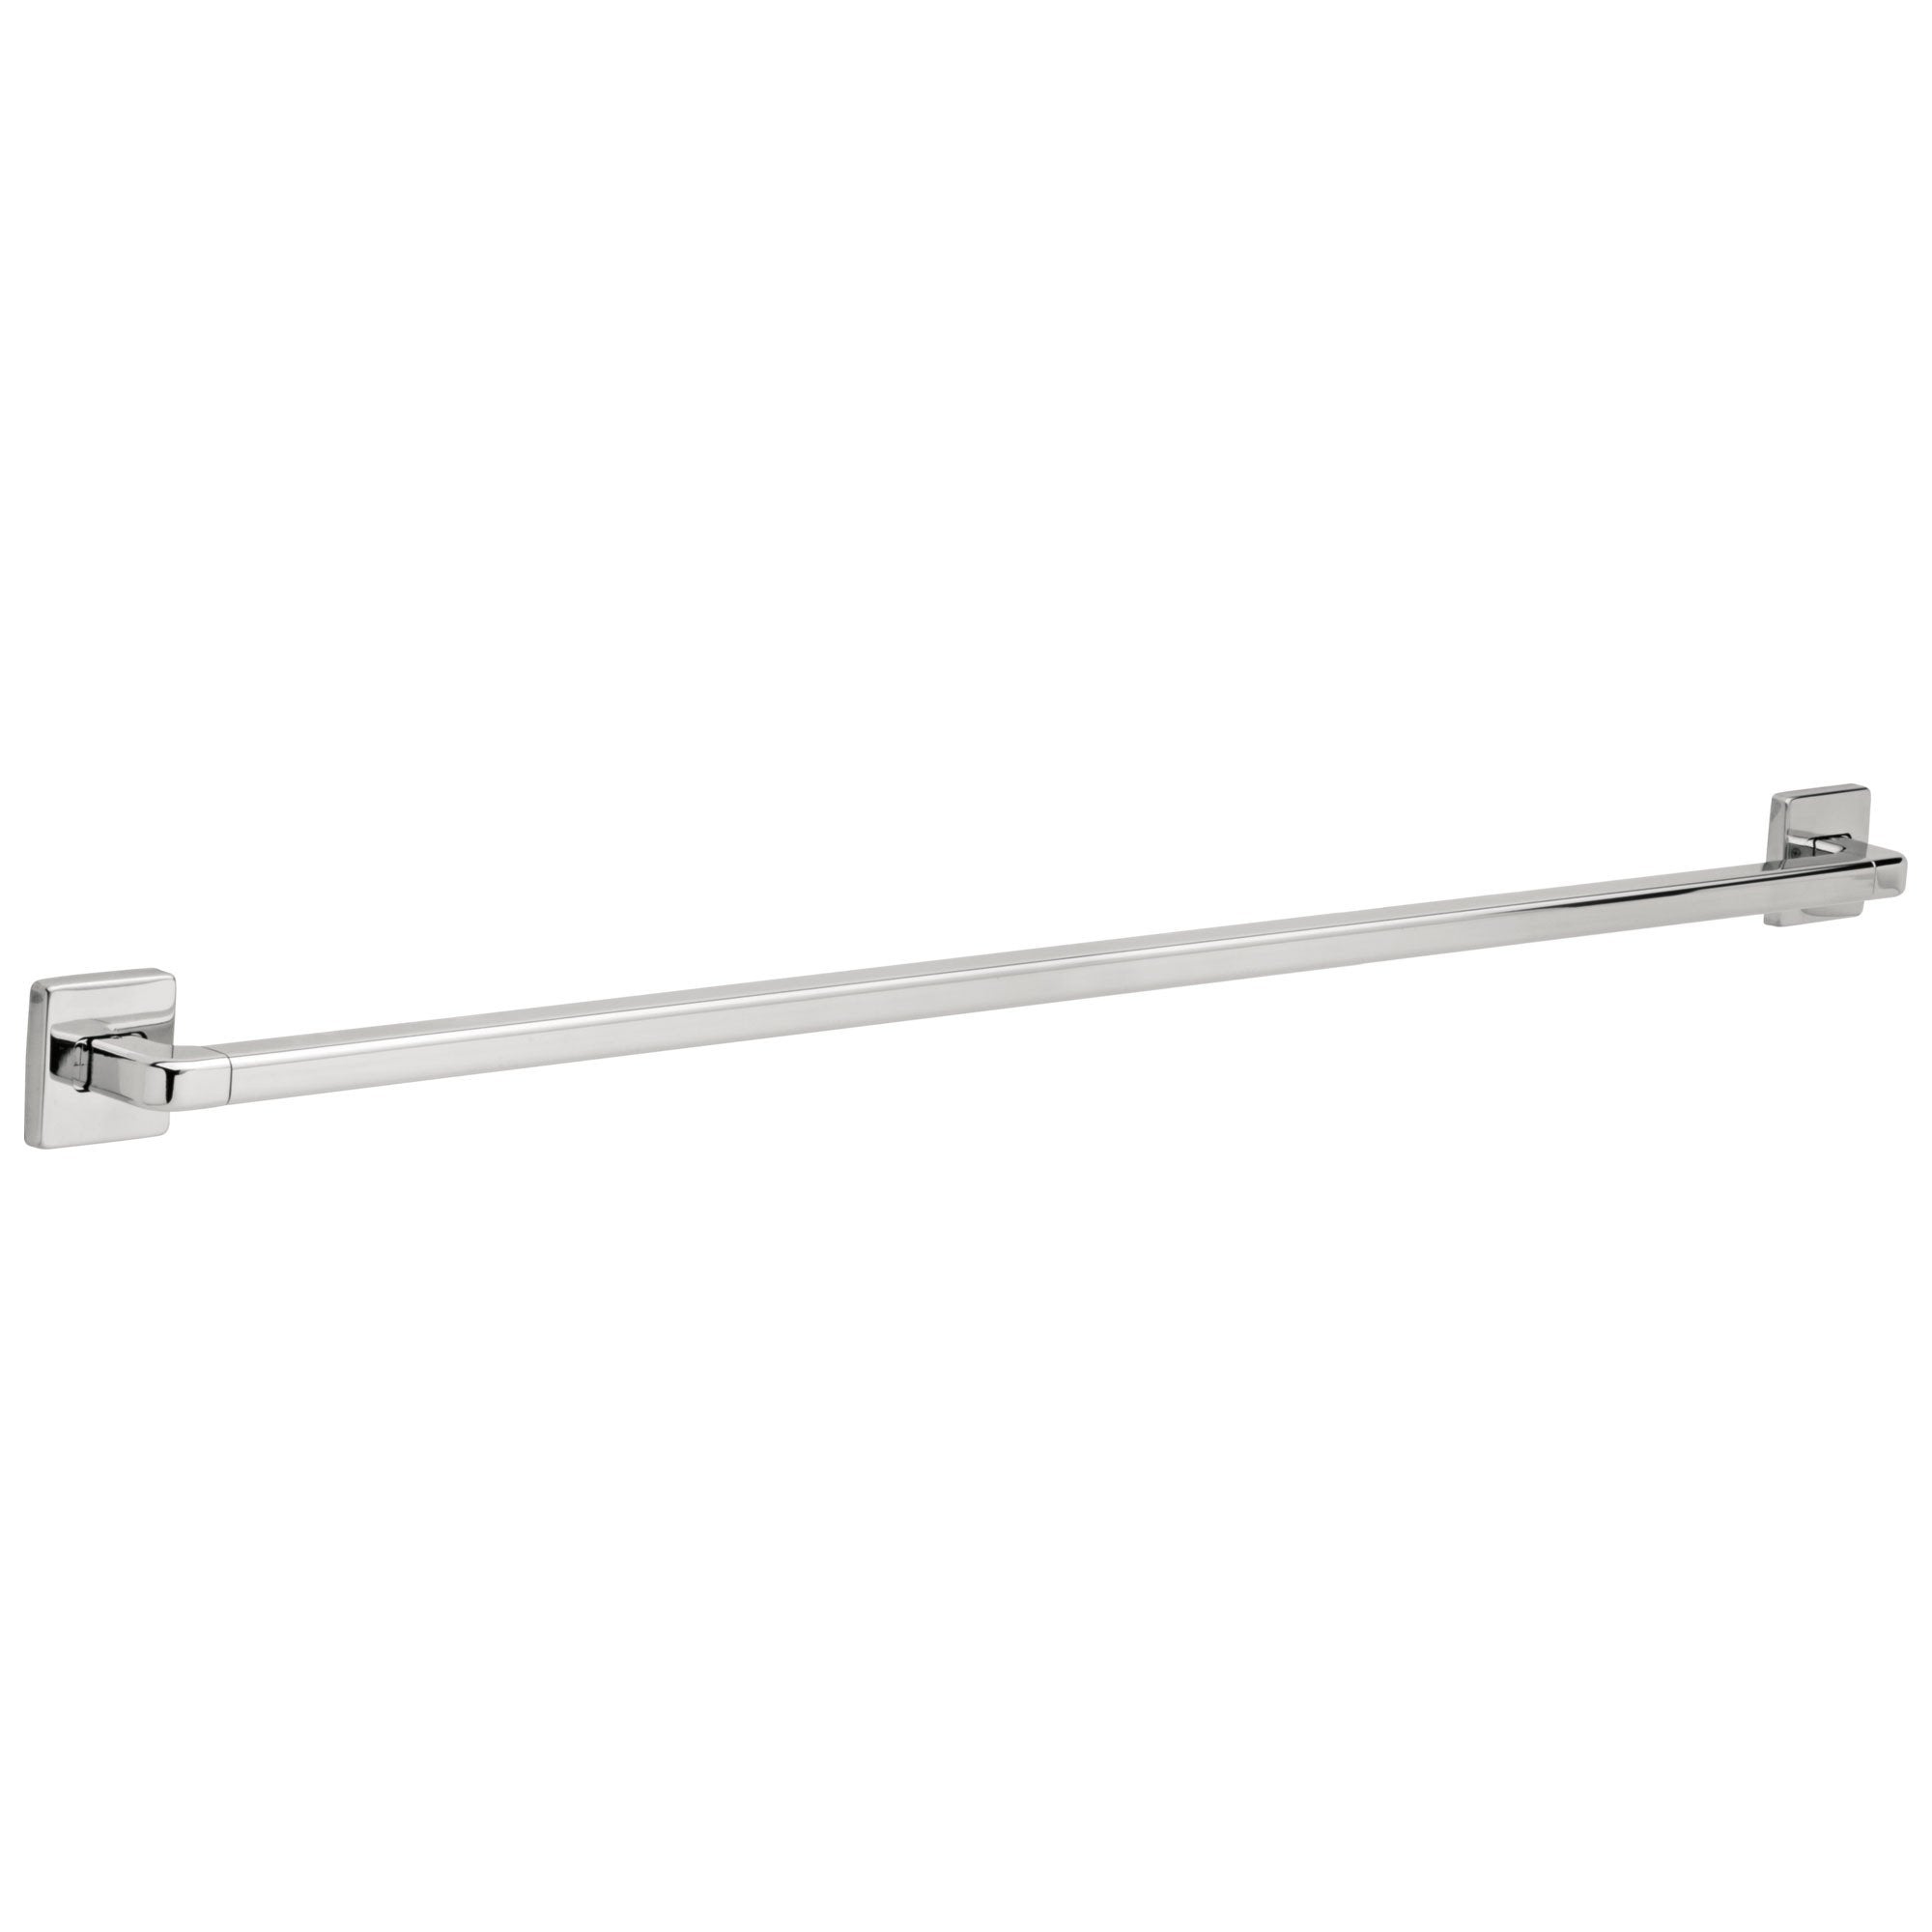 Delta Bath Safety Collection Chrome Finish Angular Modern Decorative ADA Approved Wall Mount 42" Long Grab Bar D41942